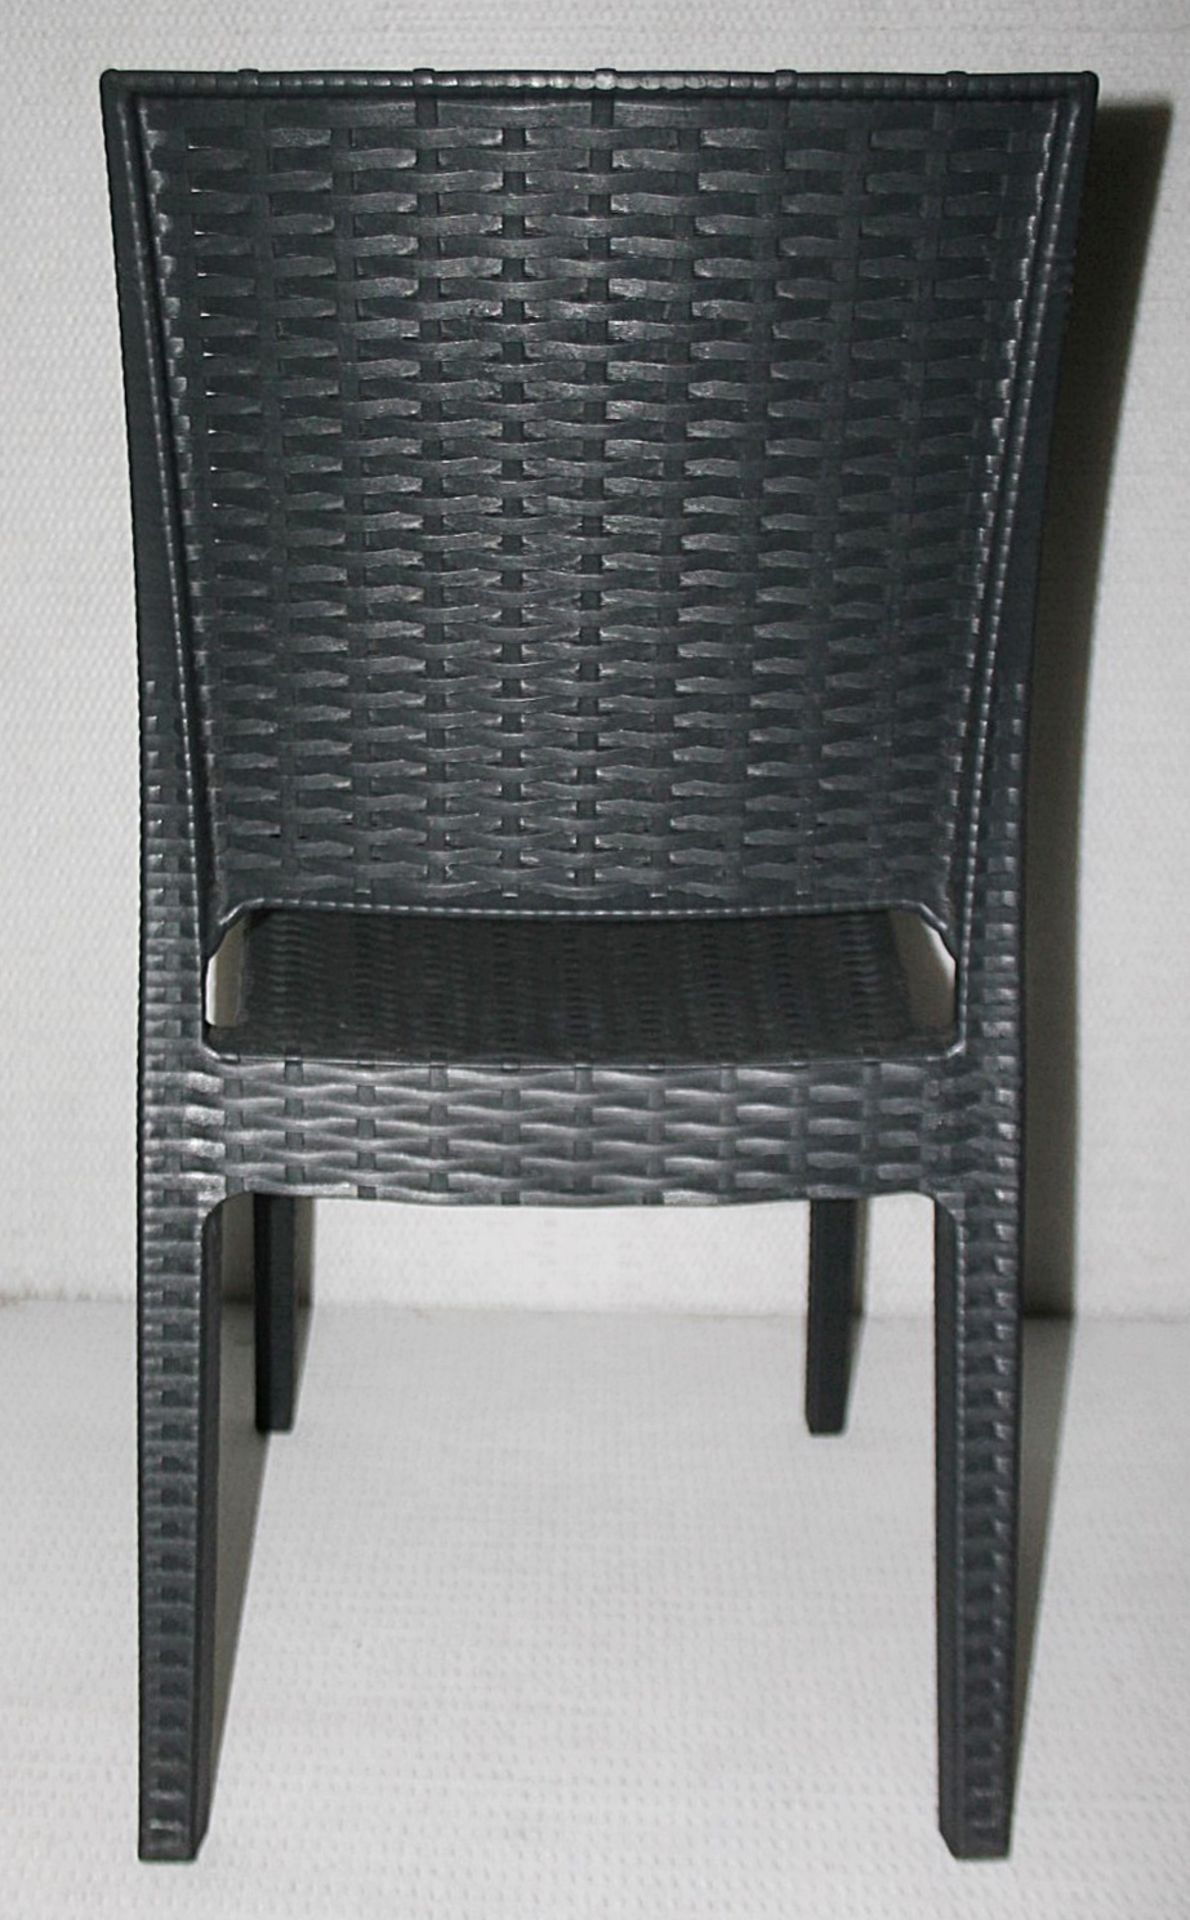 4 x Siesta 'Florida' Rattan Style Garden Chairs In Dark Grey - Suitable For Commercial or Home Use - - Image 2 of 14